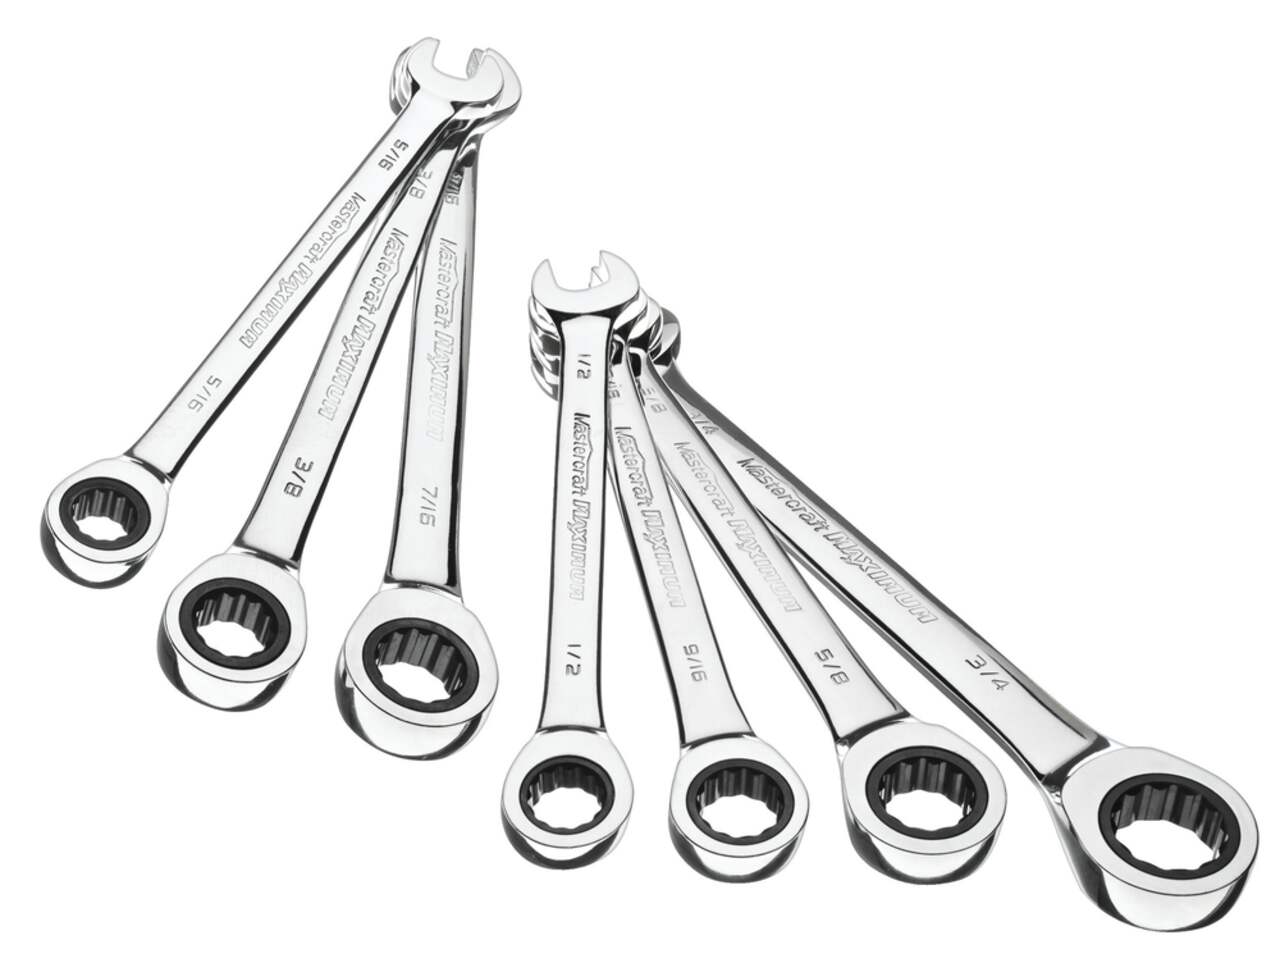 https://media-www.canadiantire.ca/product/fixing/tools/sockets-wrenches/0588516/maximum-7-piece-wrench-set-metric-f22ae604-31c3-499c-8fcb-01995066054f.png?imdensity=1&imwidth=640&impolicy=mZoom